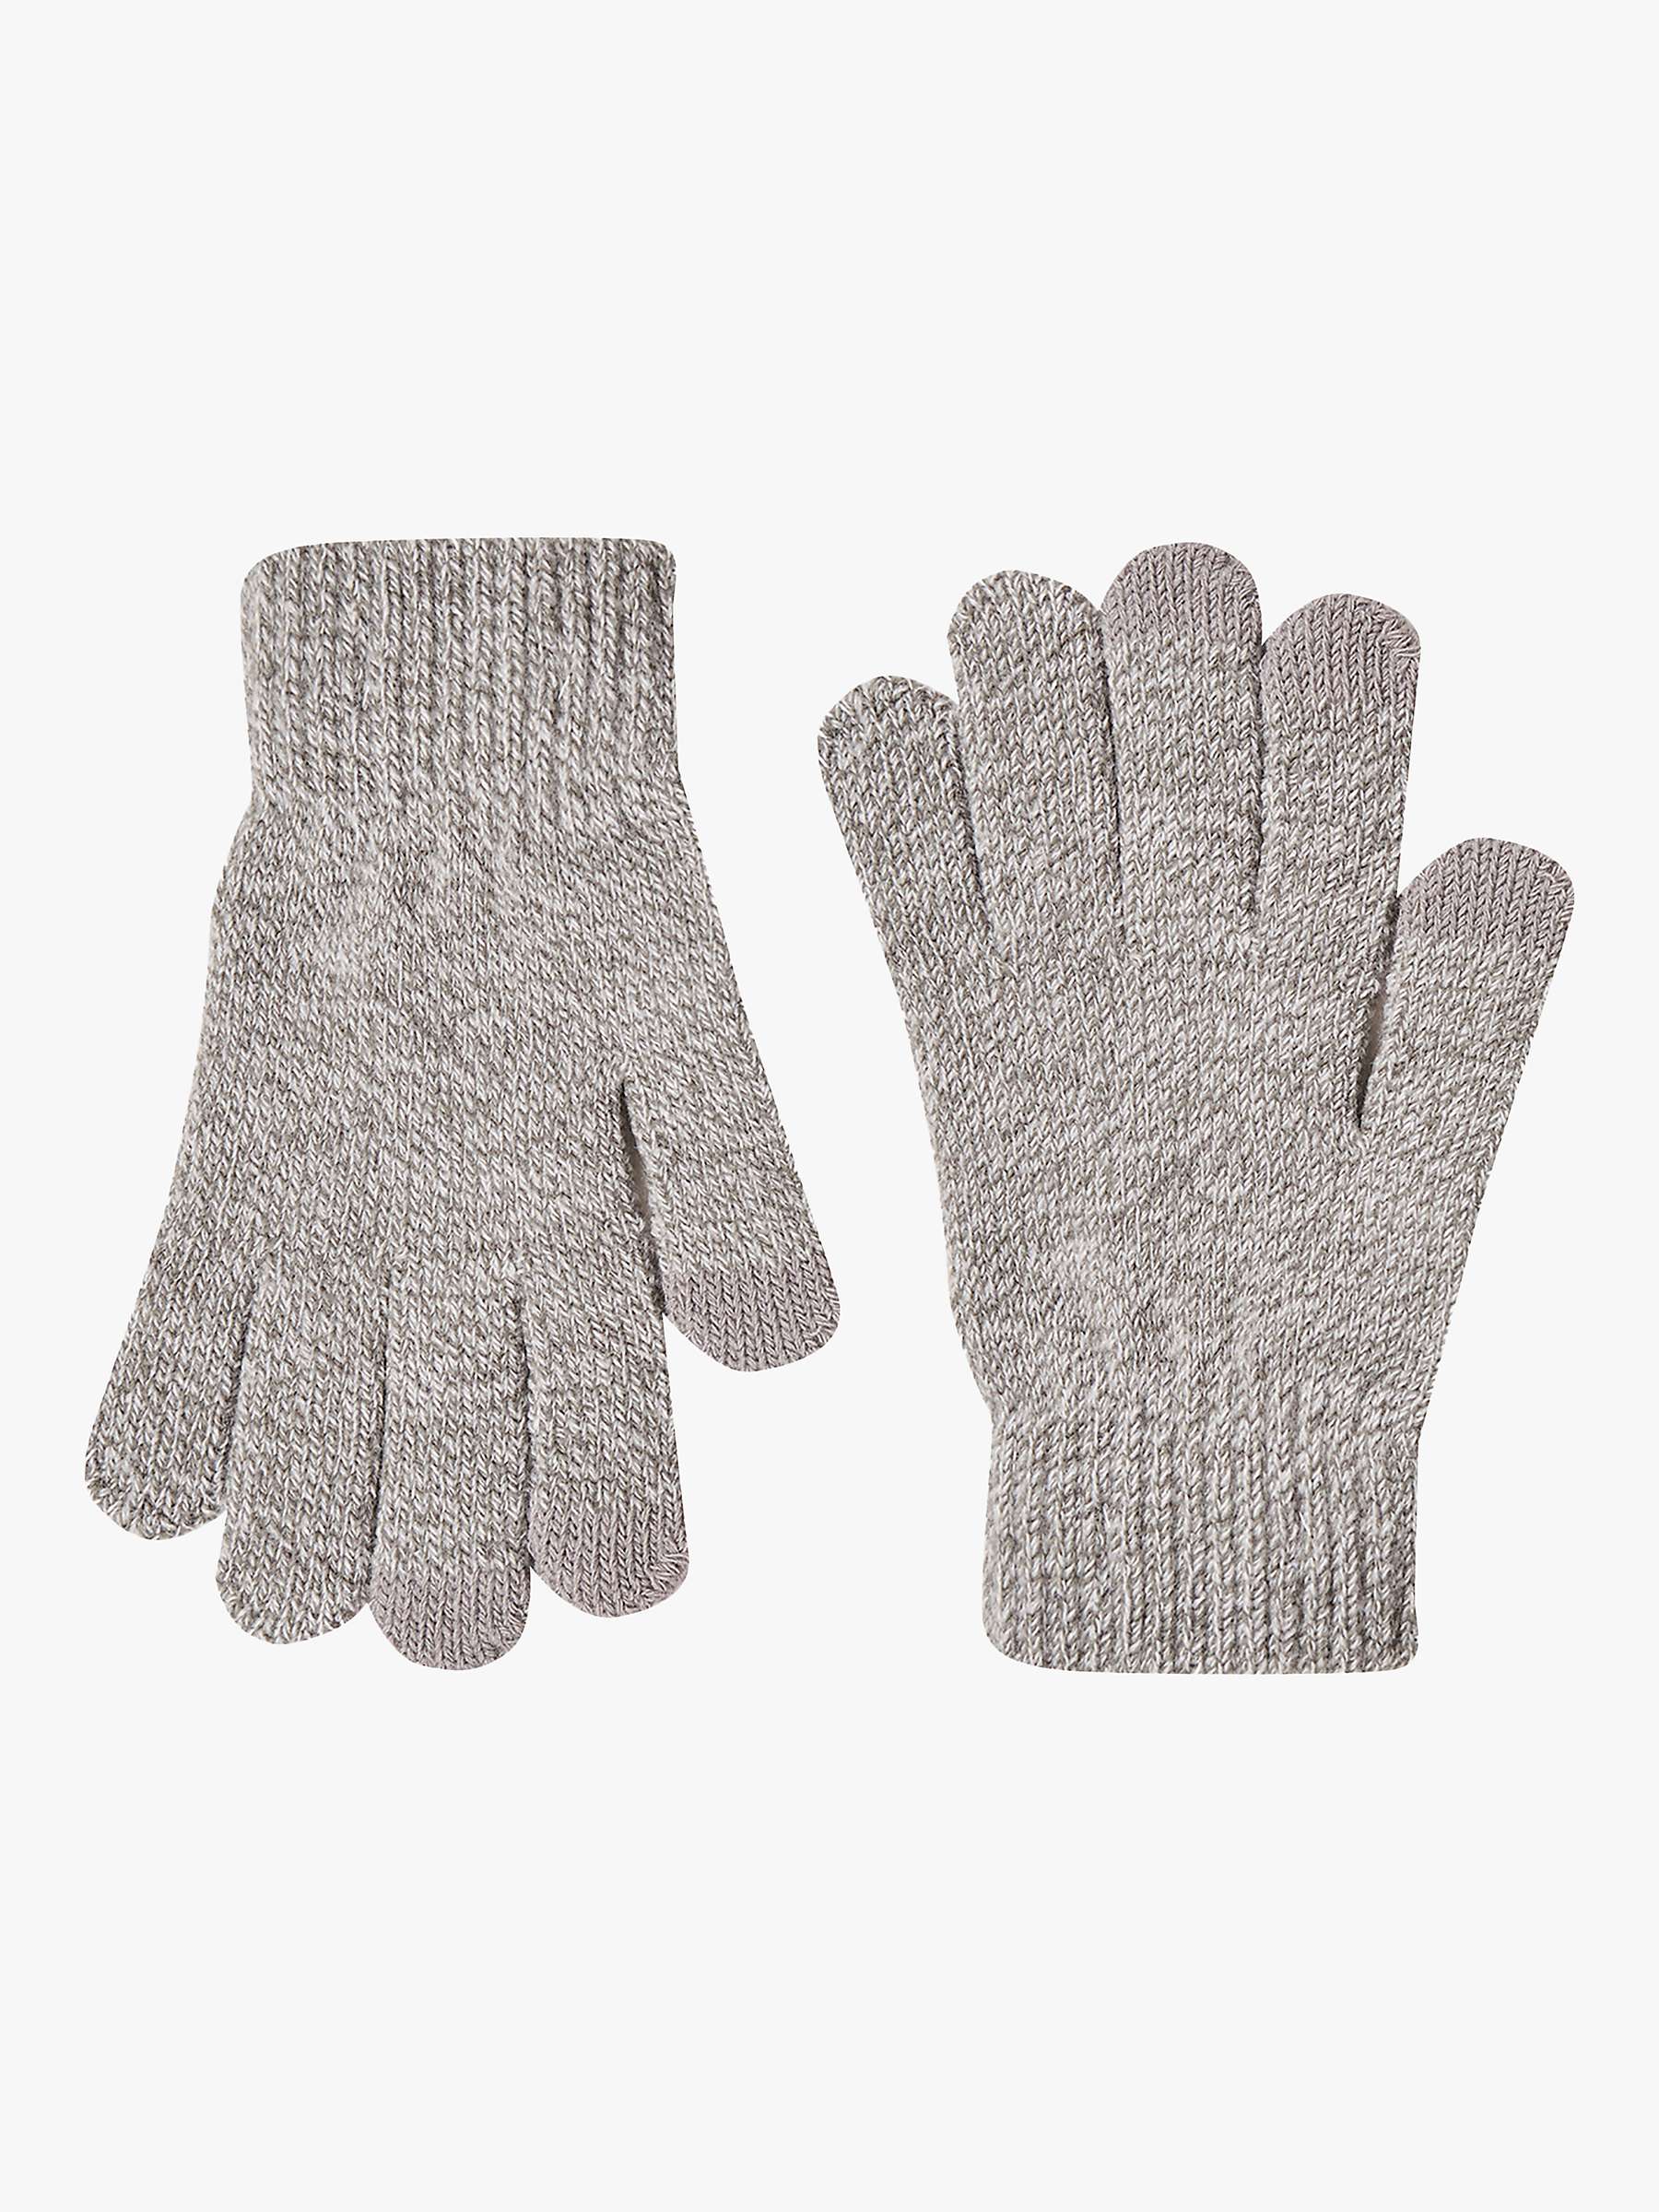 Buy French Connection Touch Screen Gloves, Light Grey Online at johnlewis.com